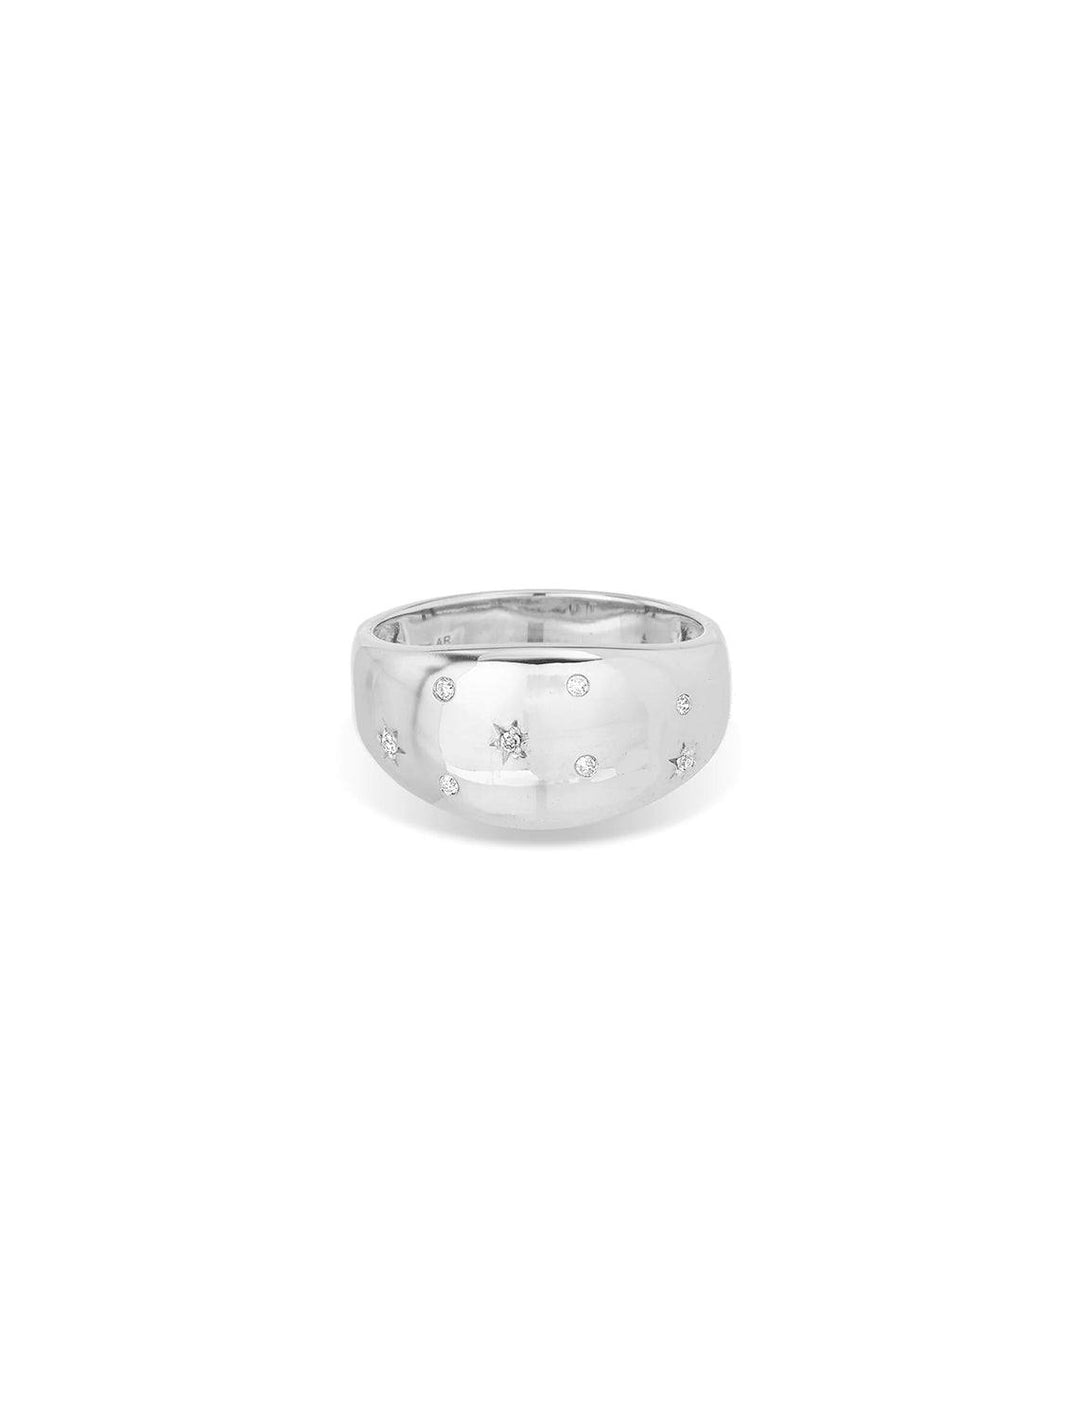 Front view of Adina Reyter's celestial diamond large half dome ring in silver.